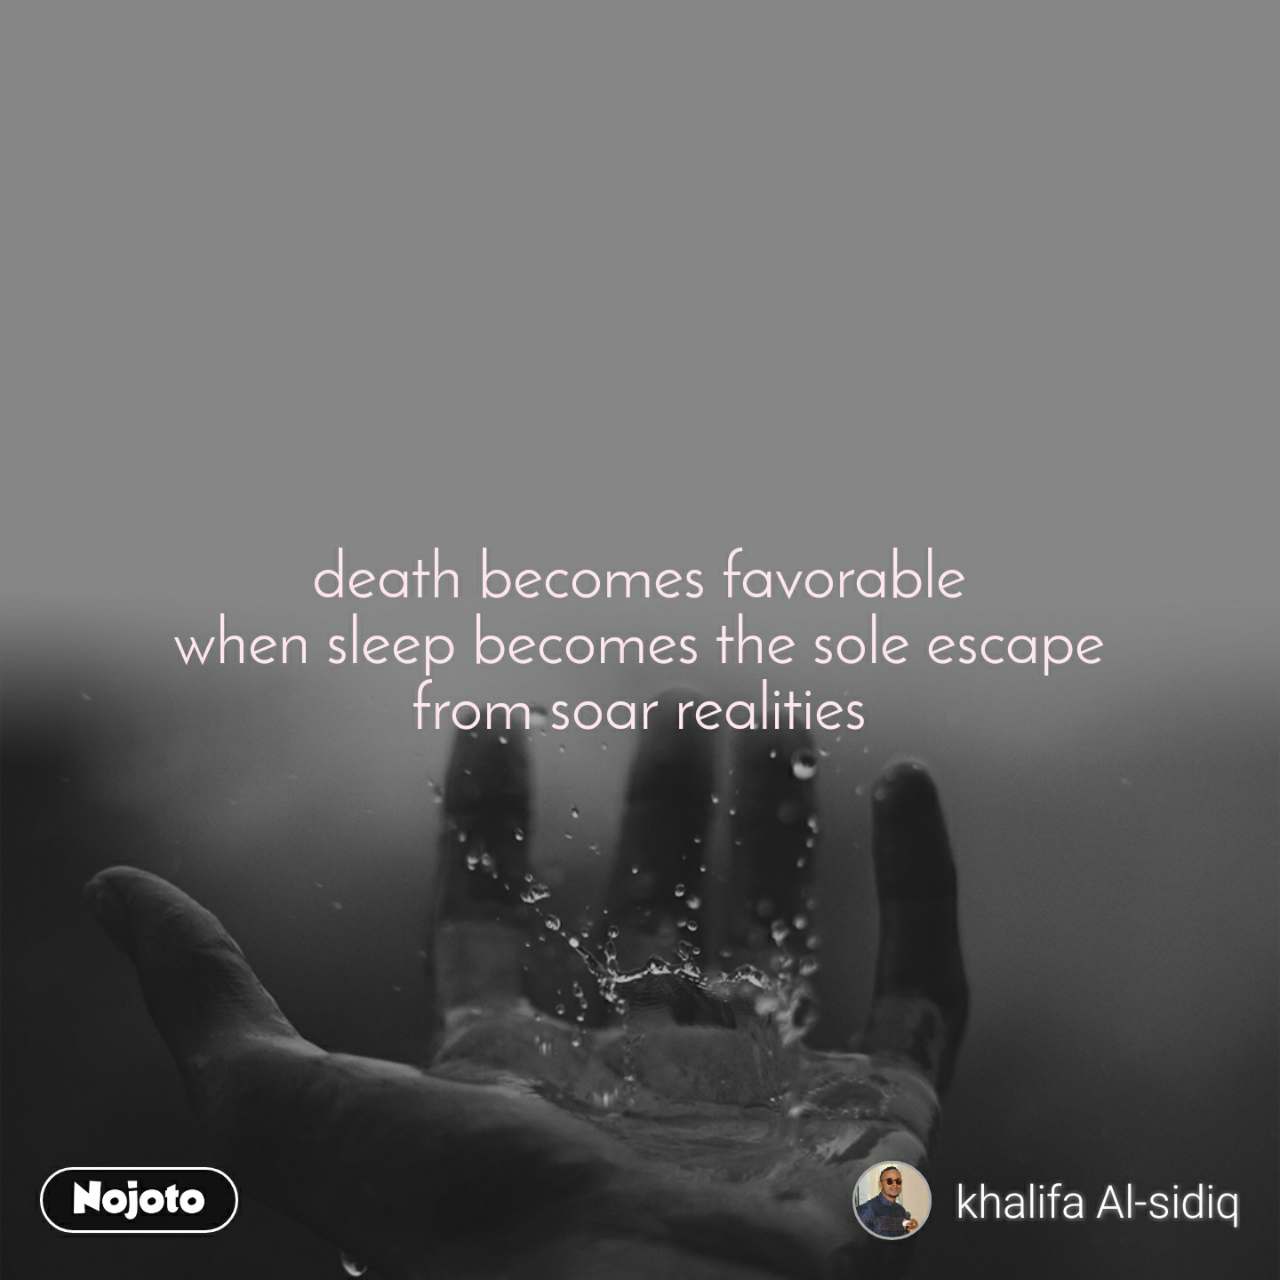 death becomes favorable when sleep becomes the sole escape from soar realities